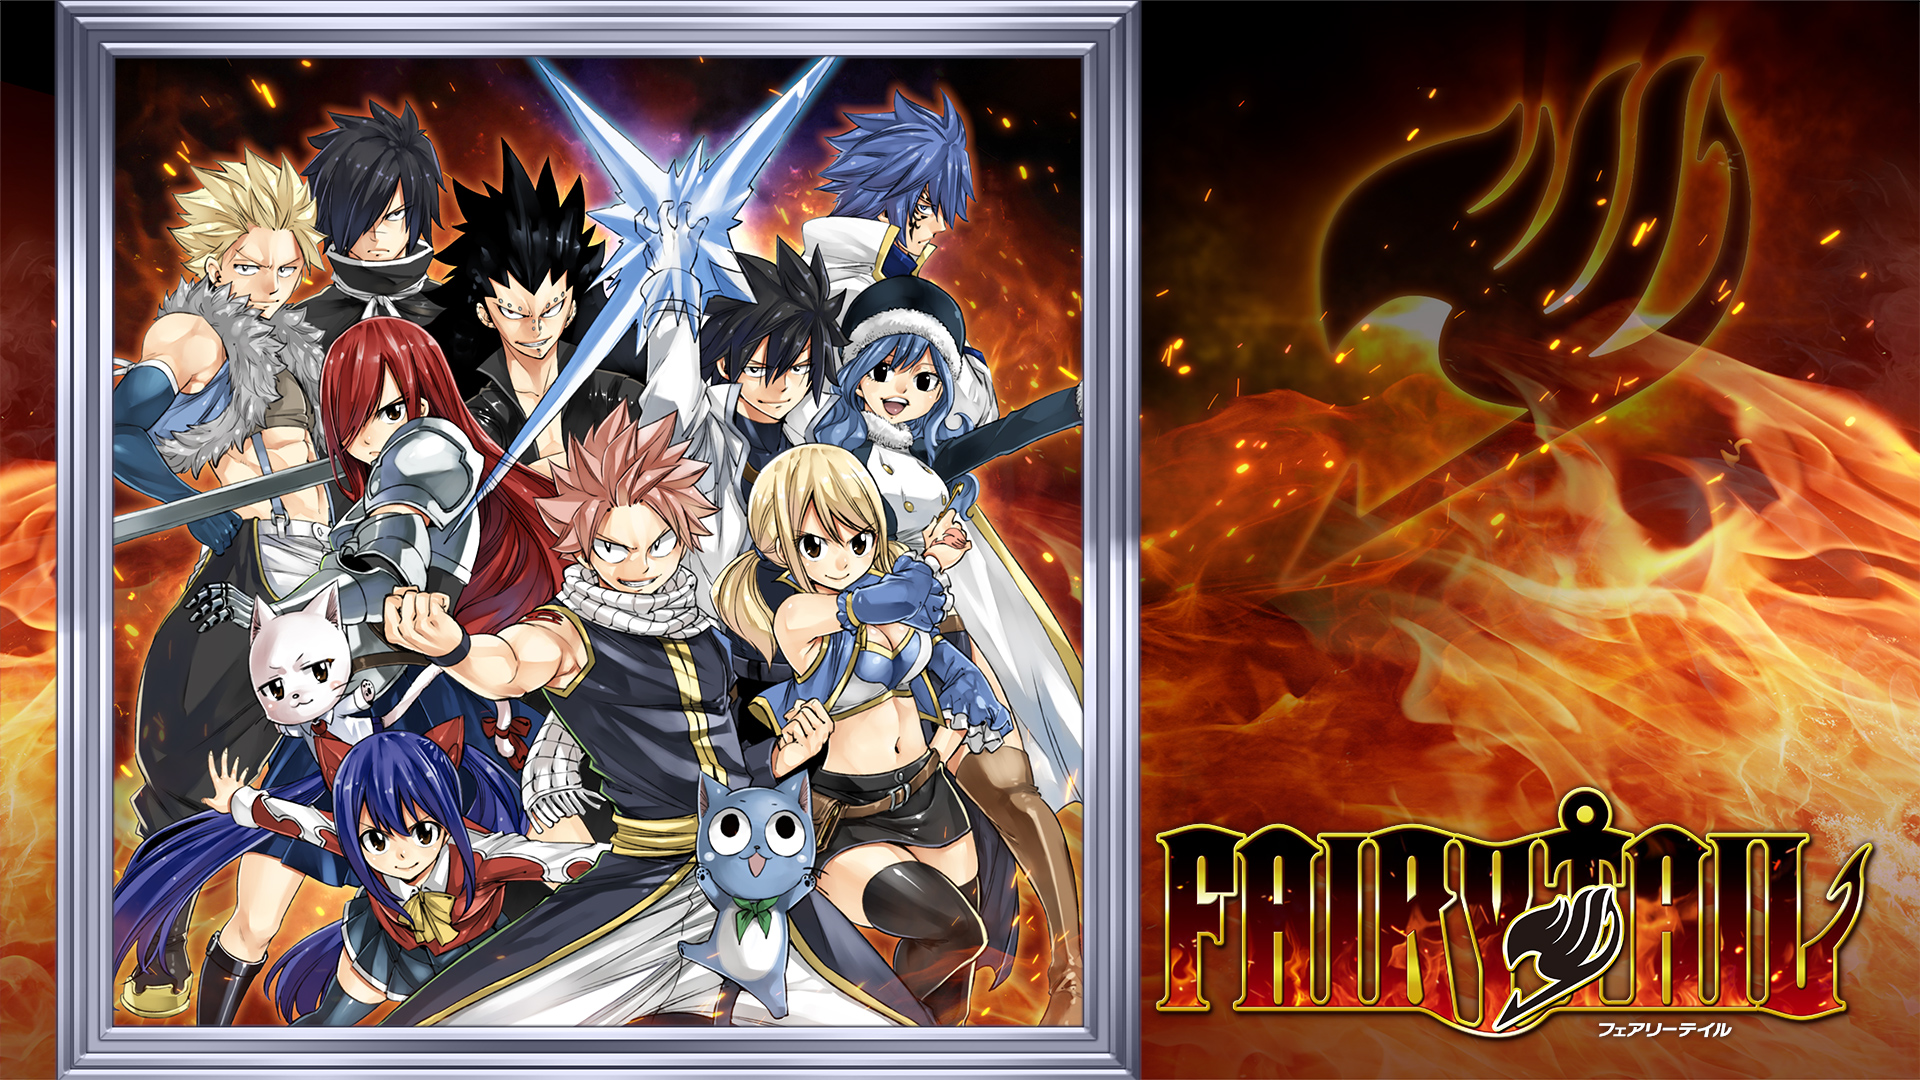 Fairy Tail Digital Deluxe Nintendo Switchソフト 任天堂